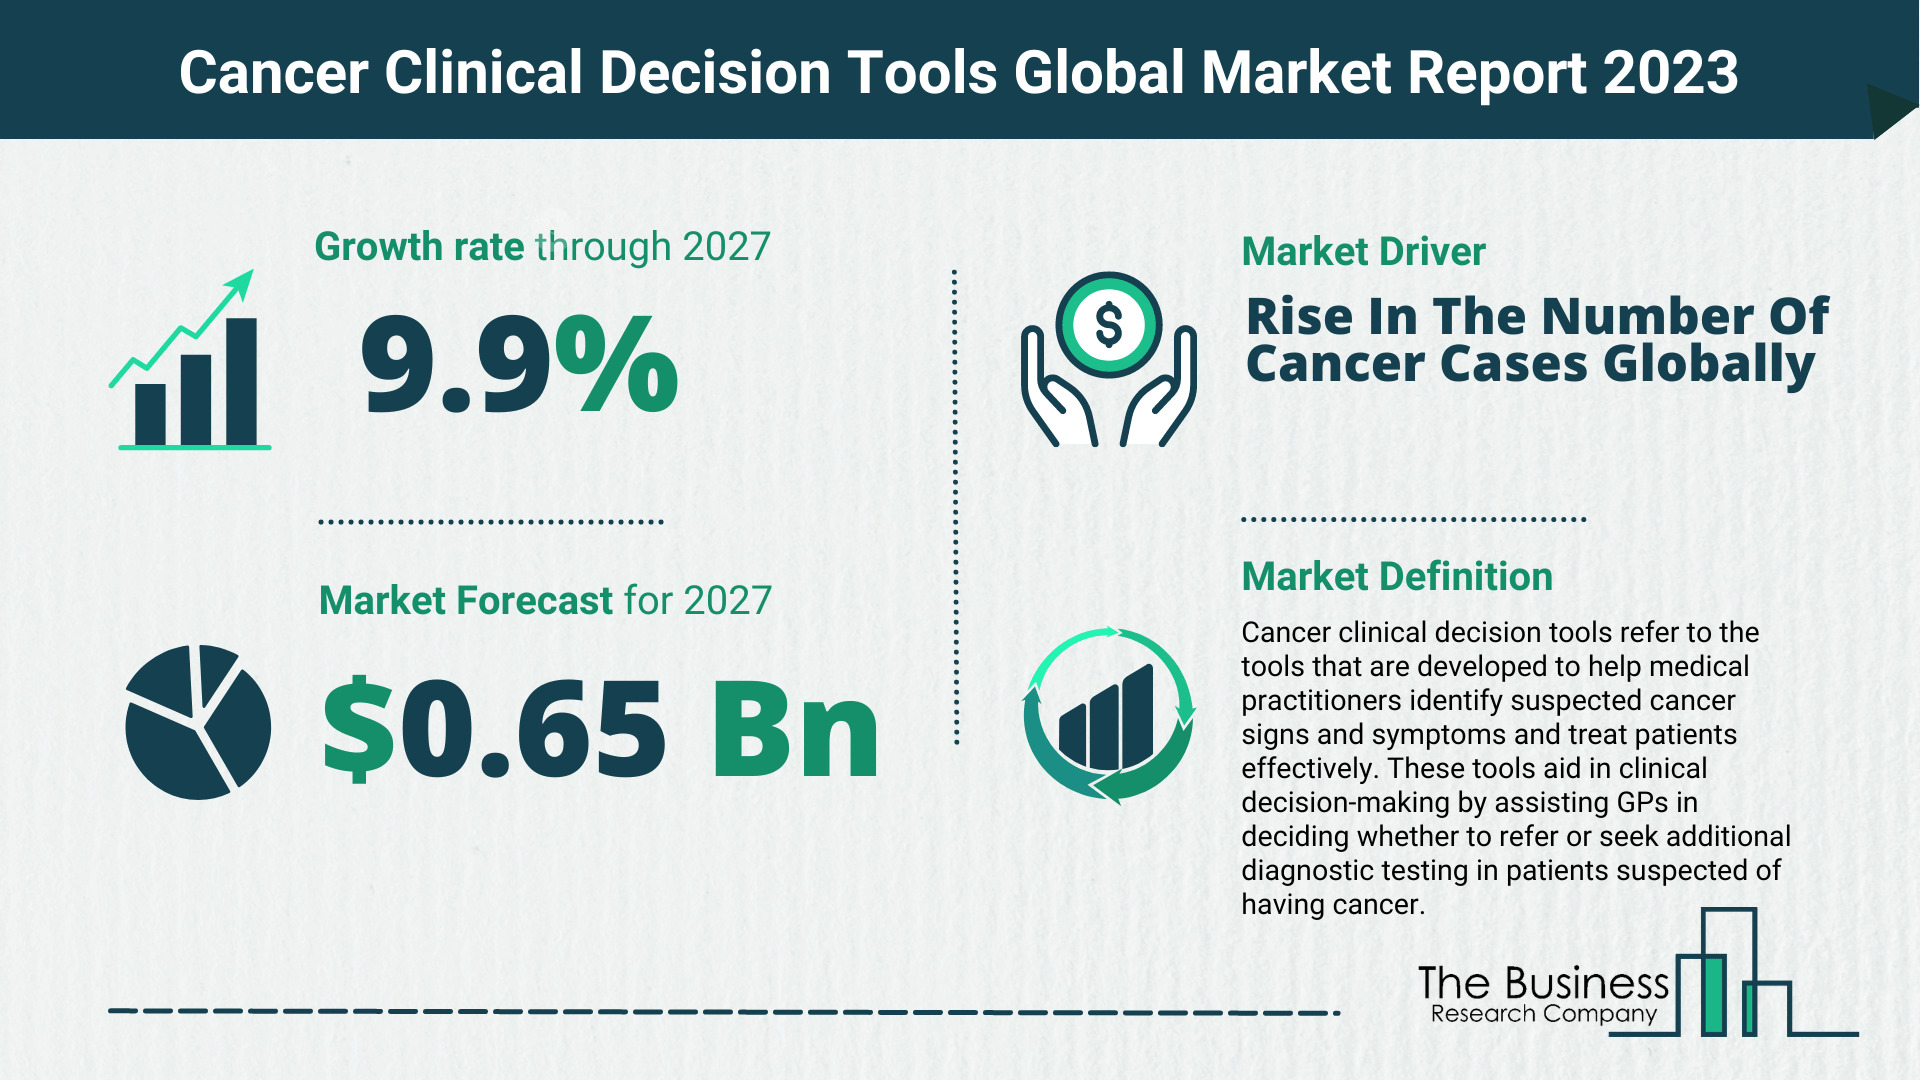 How Will The Cancer Clinical Decision Tools Market Globally Expand In 2023?